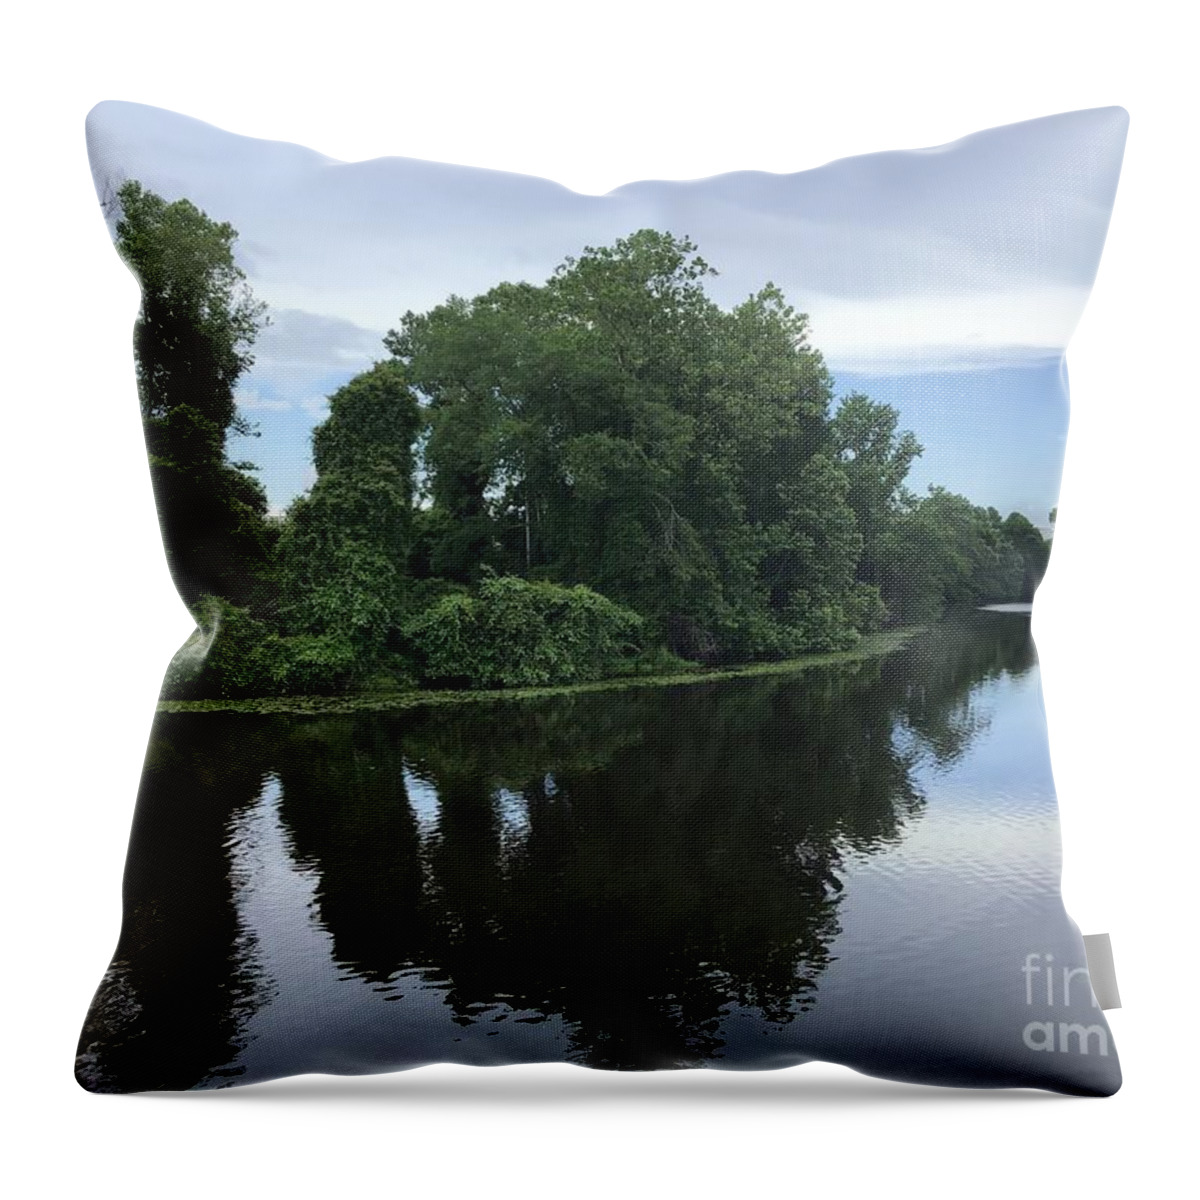 Blackwater Throw Pillow featuring the photograph Blackwater River Tree Show by Catherine Wilson